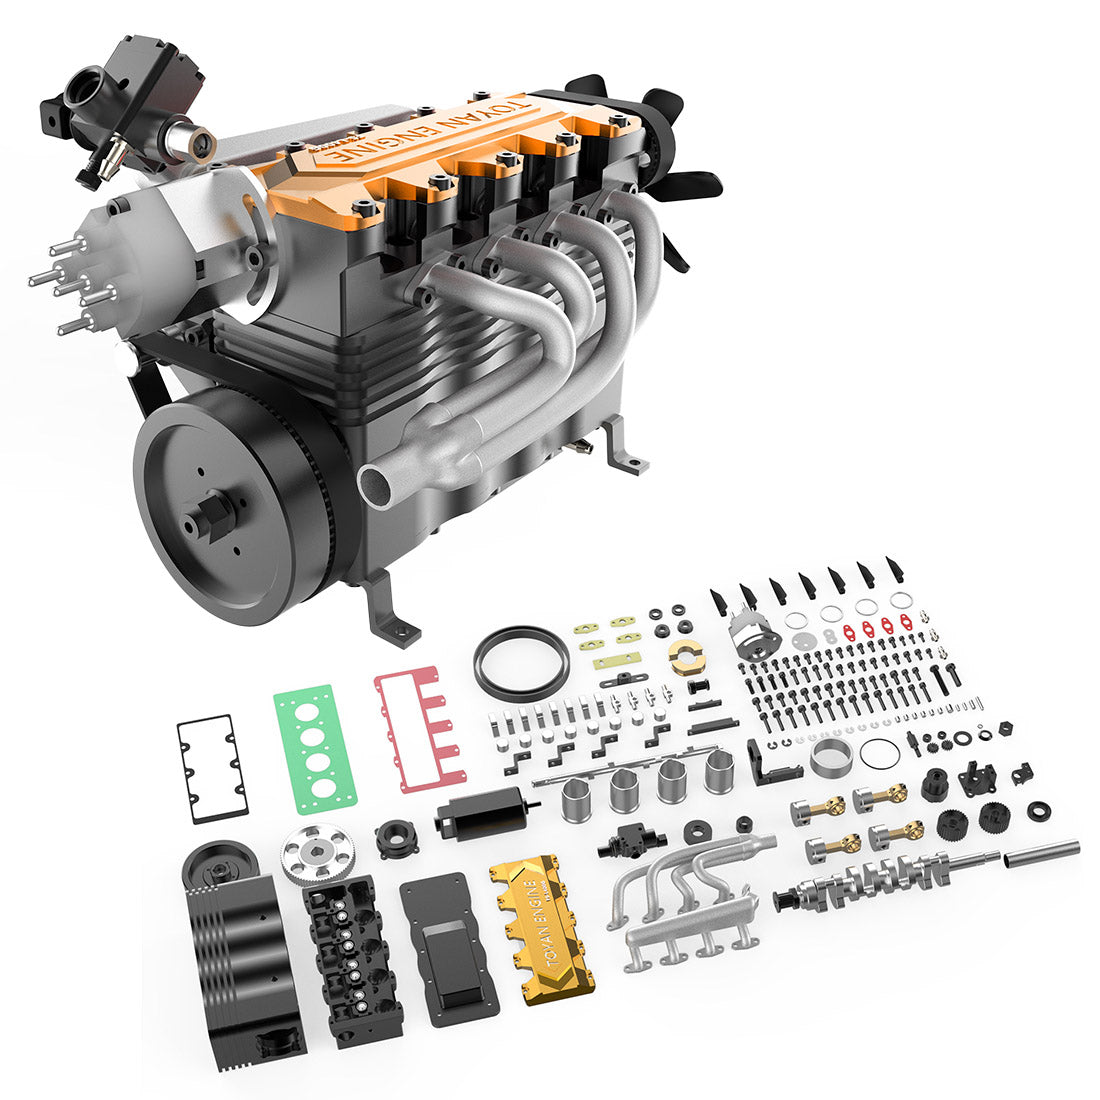 toyan l400bgc engine model kit that works build your own engine 4 cyclinder four stroke water cooling rc car ship airplan